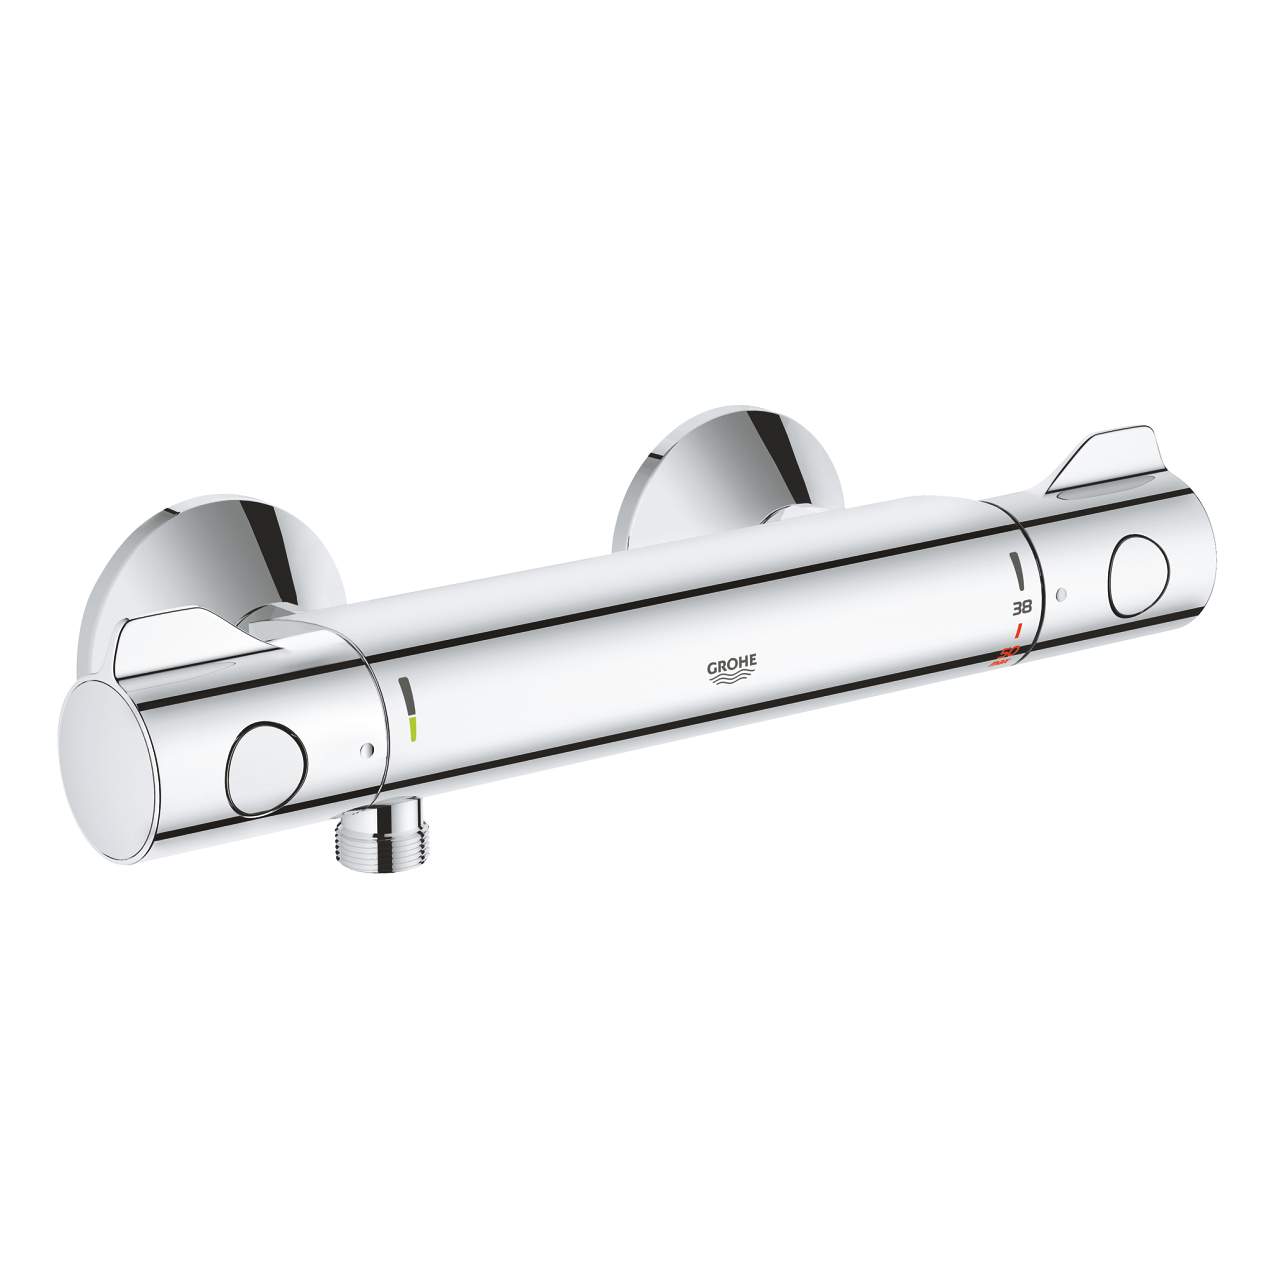 Thermostatic shower mixer - Grohtherm G800